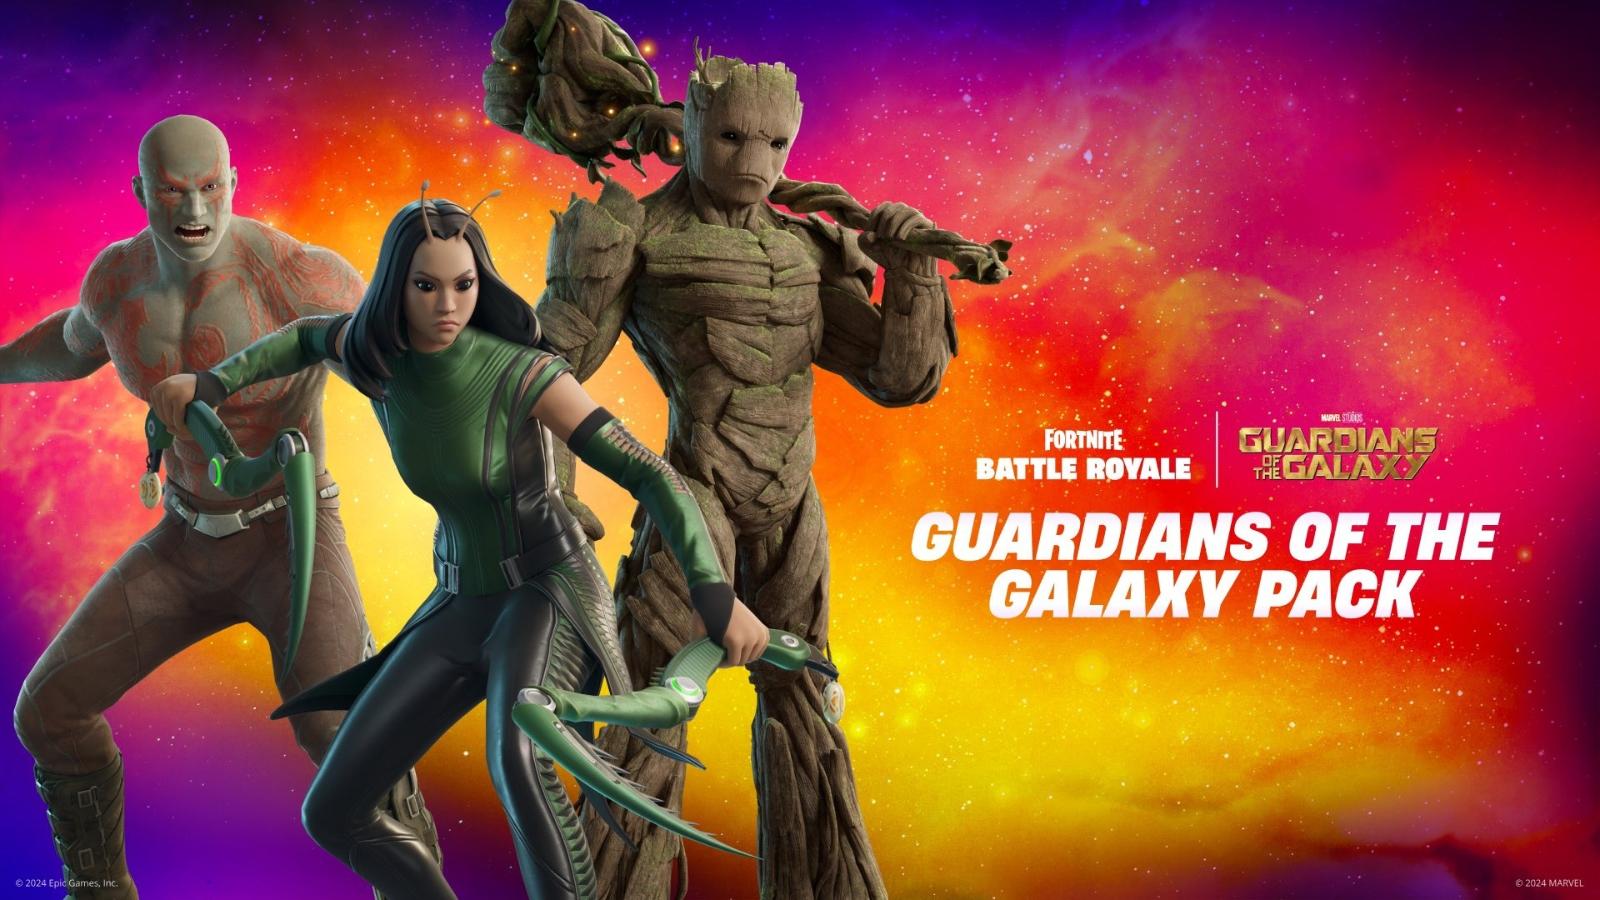 Guardians of the Galaxy pack in Fortnite cover